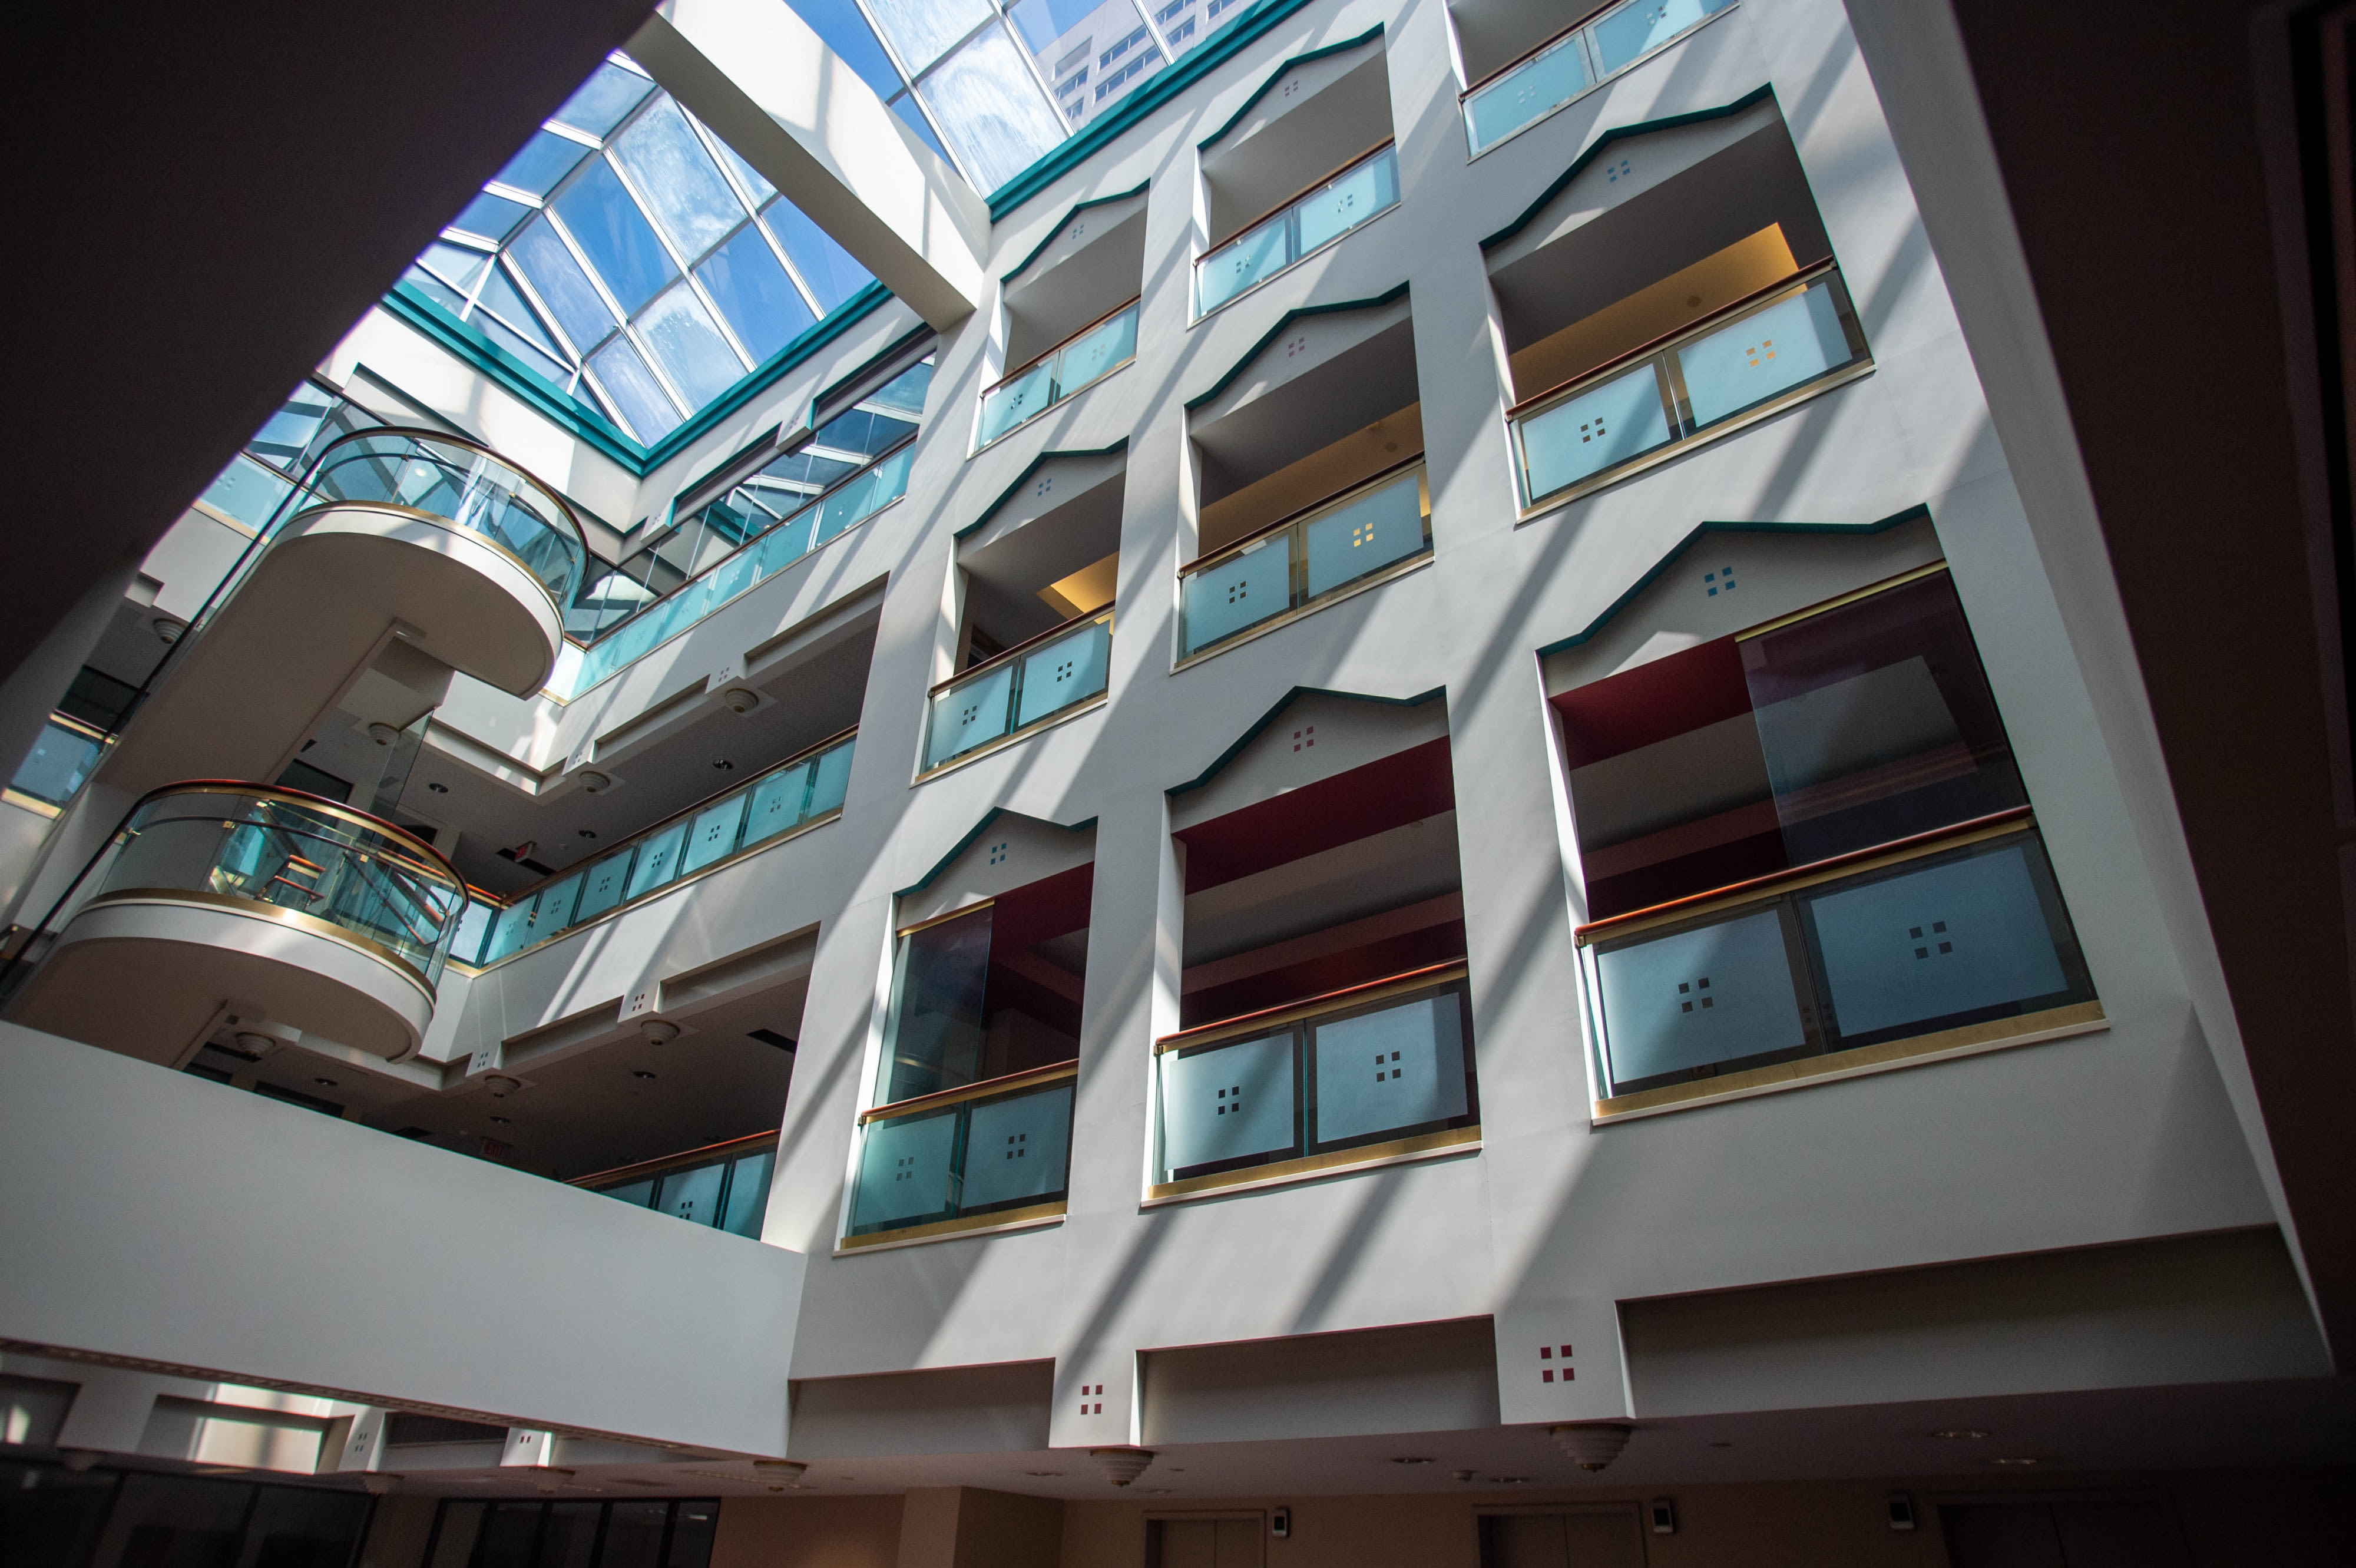 PHOTOS: UConn plans to convert office space into a residence hall